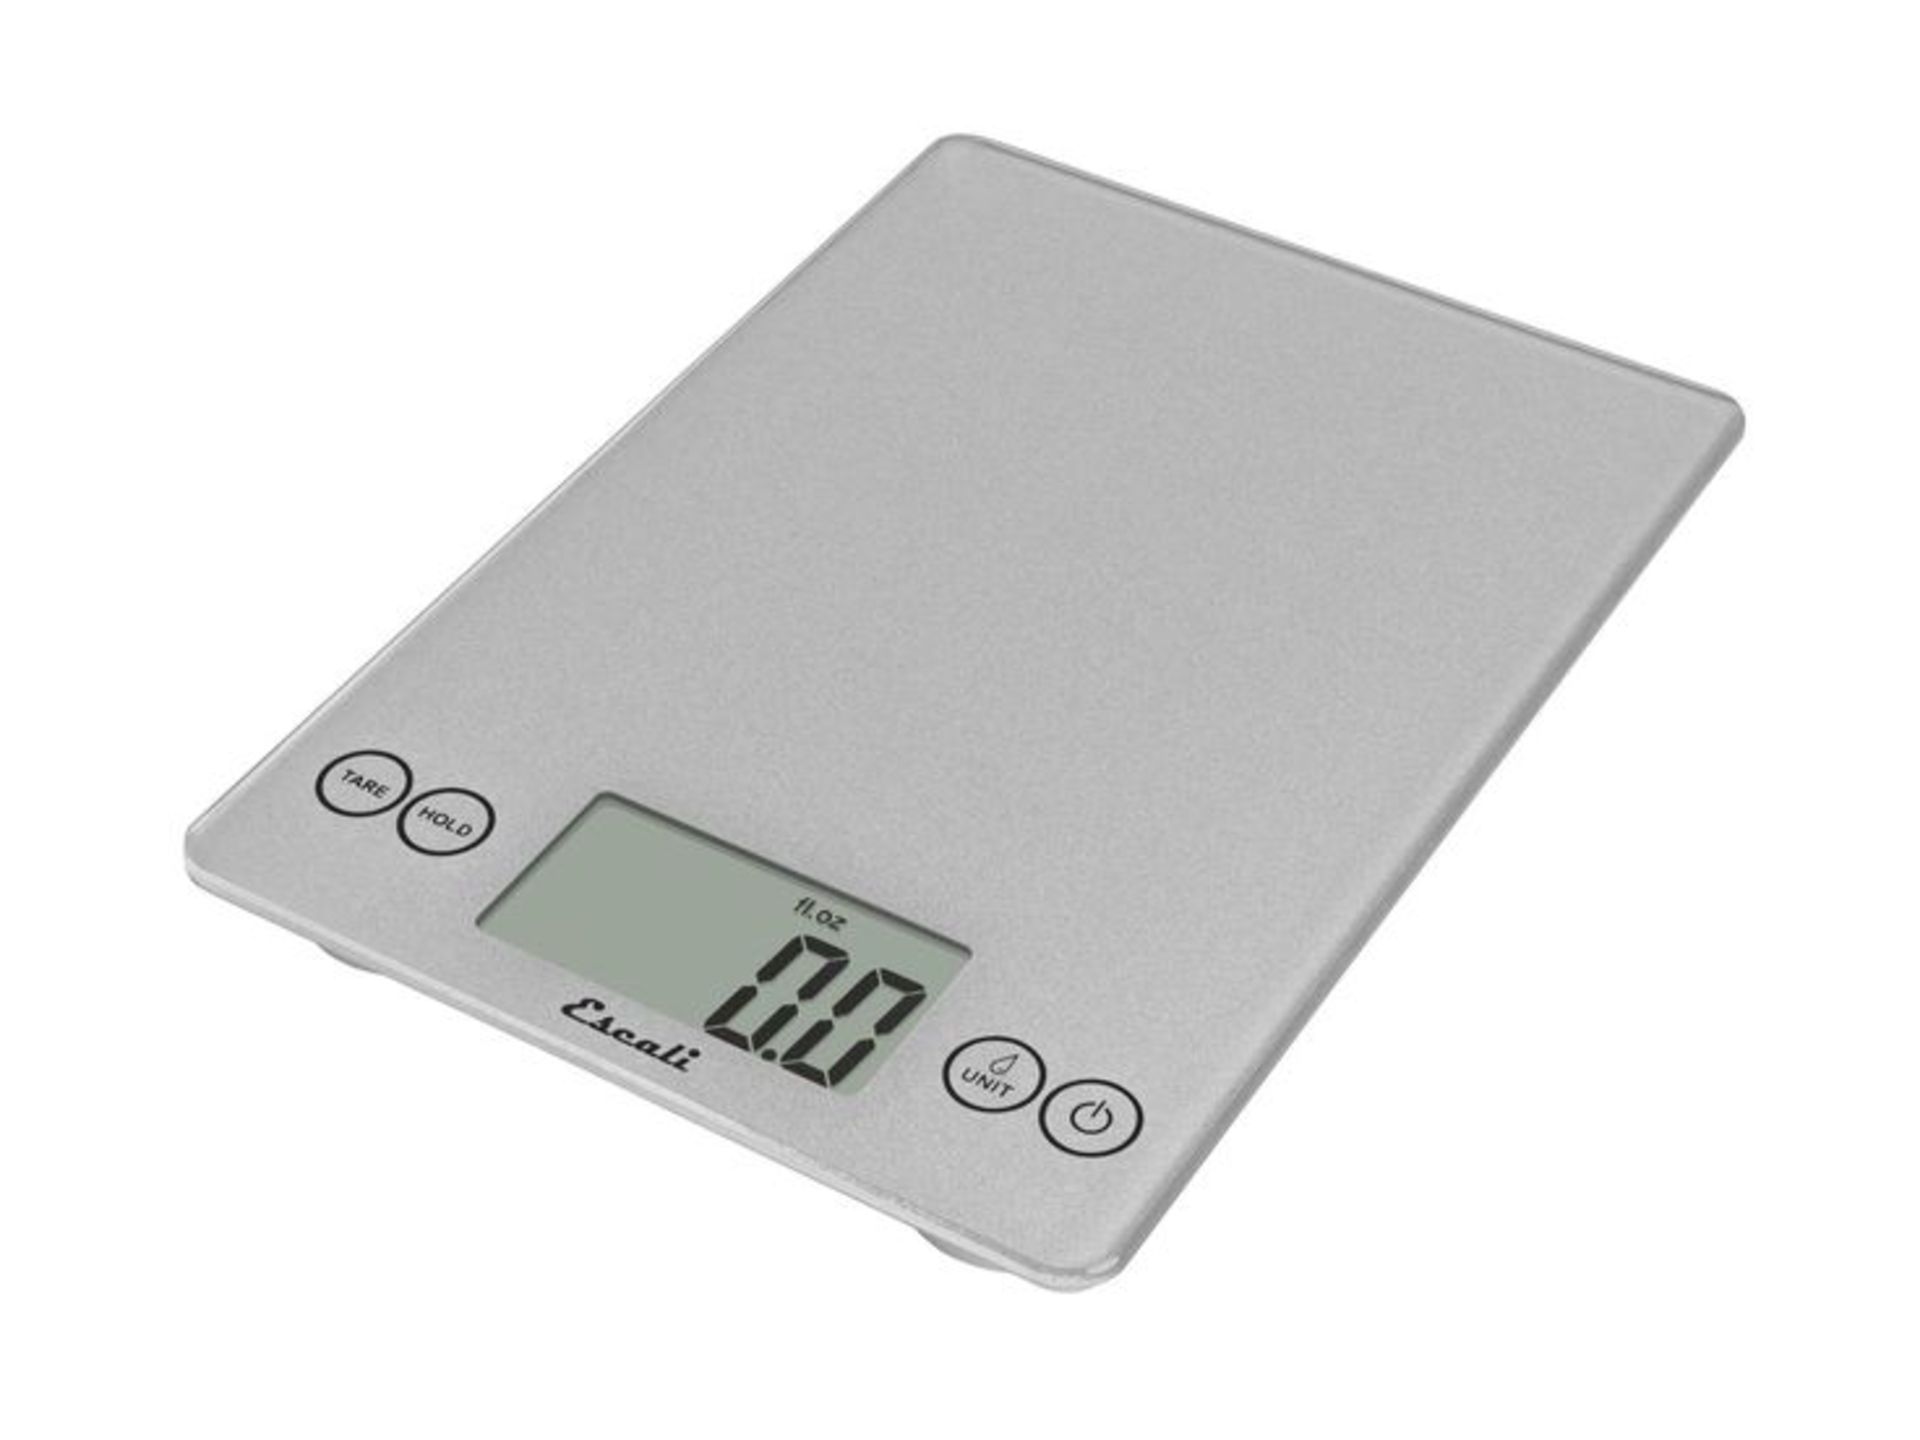 V Brand New Digital Kitchen Scales With Large LCD Display In Ibs Ozs & Grams (Styles May Vary & - Image 3 of 4